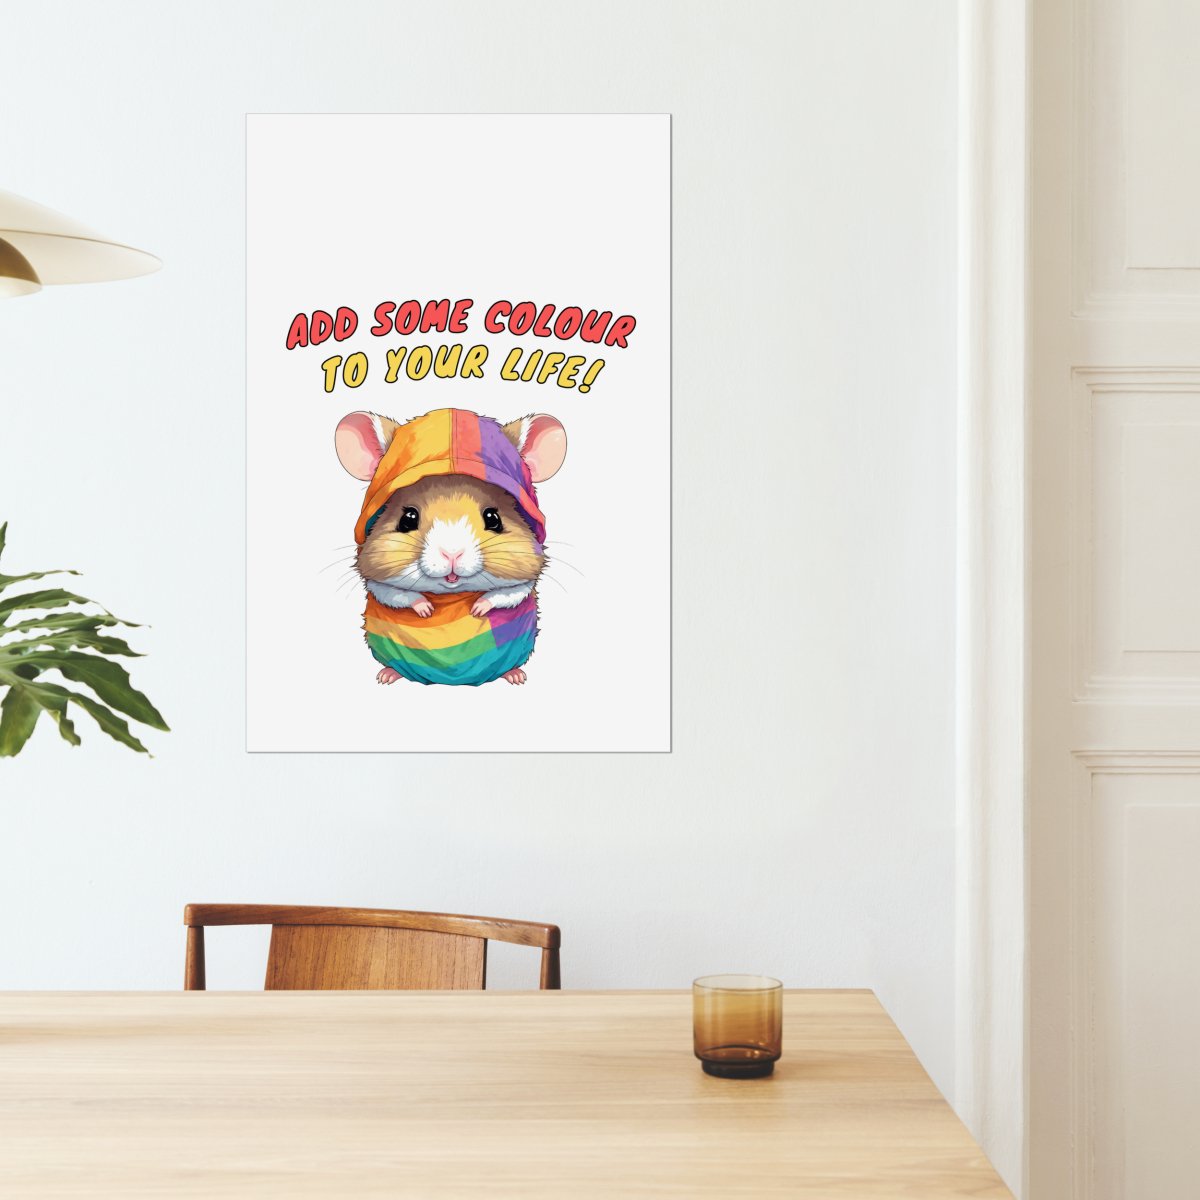 Colour to your life - Art print - Poster - Ever colorful